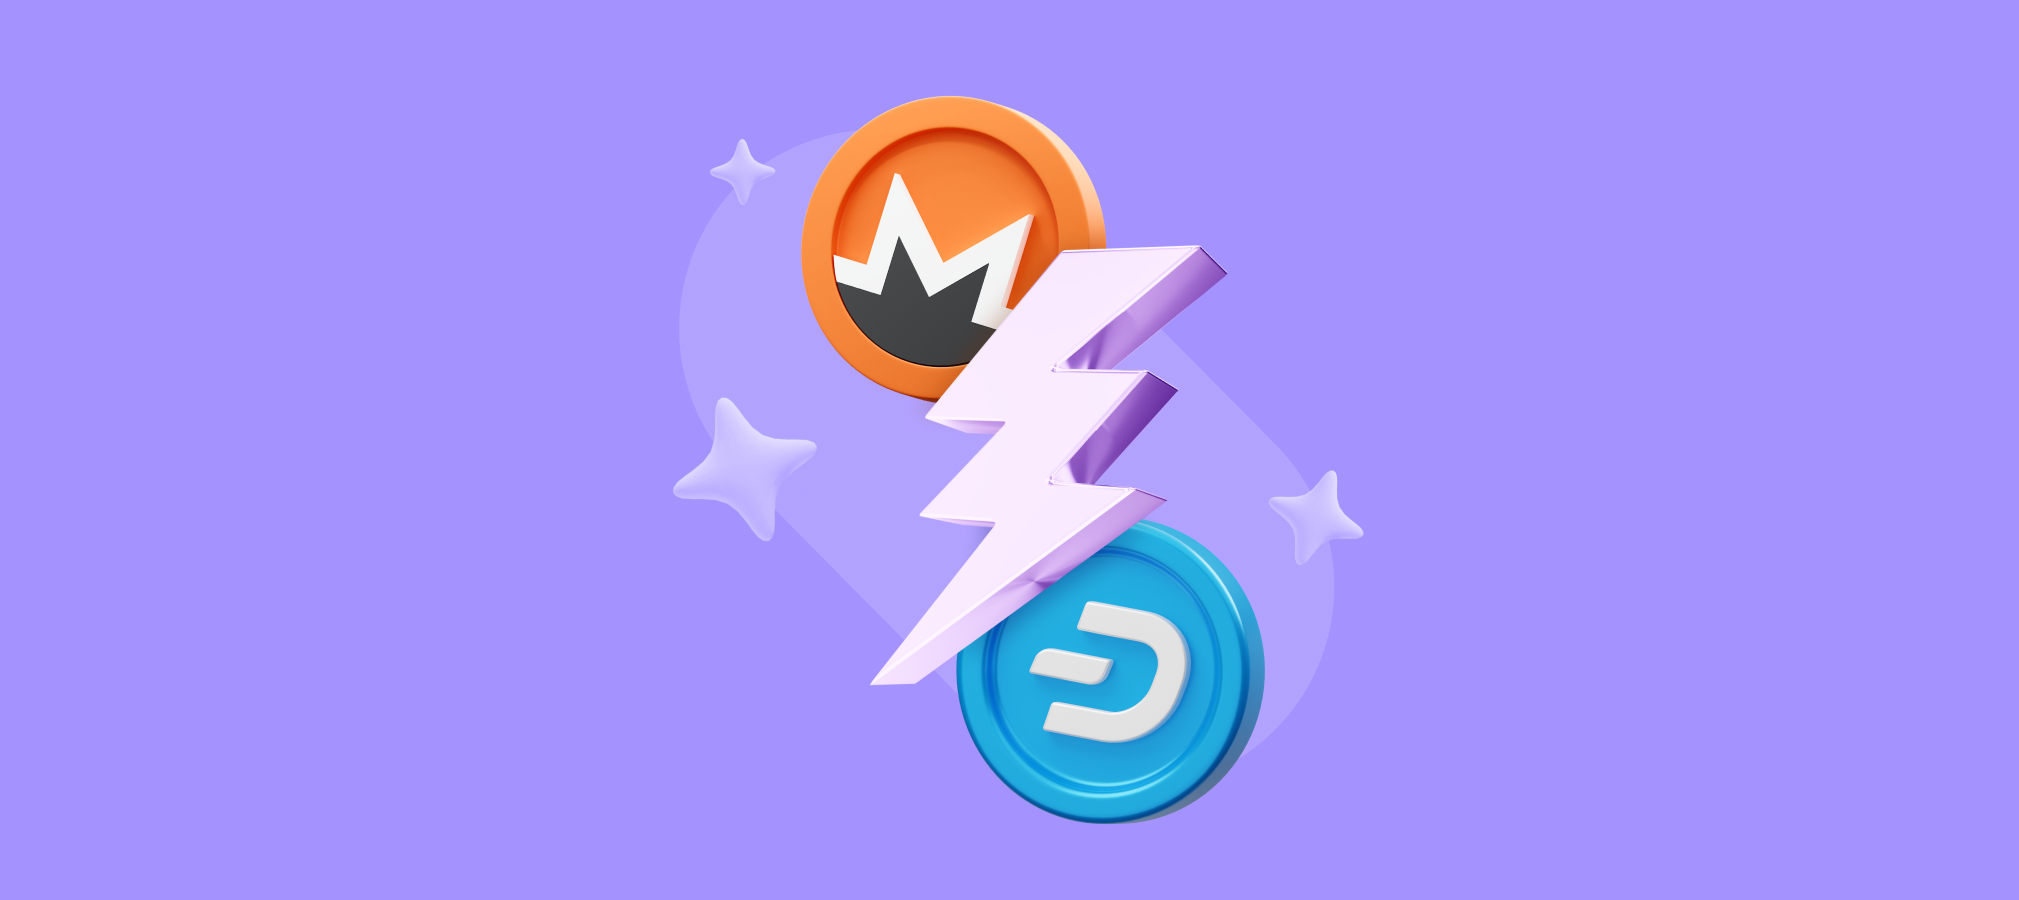 Monero vs Dash: Which Crypto Offers the Best Privacy and Security?